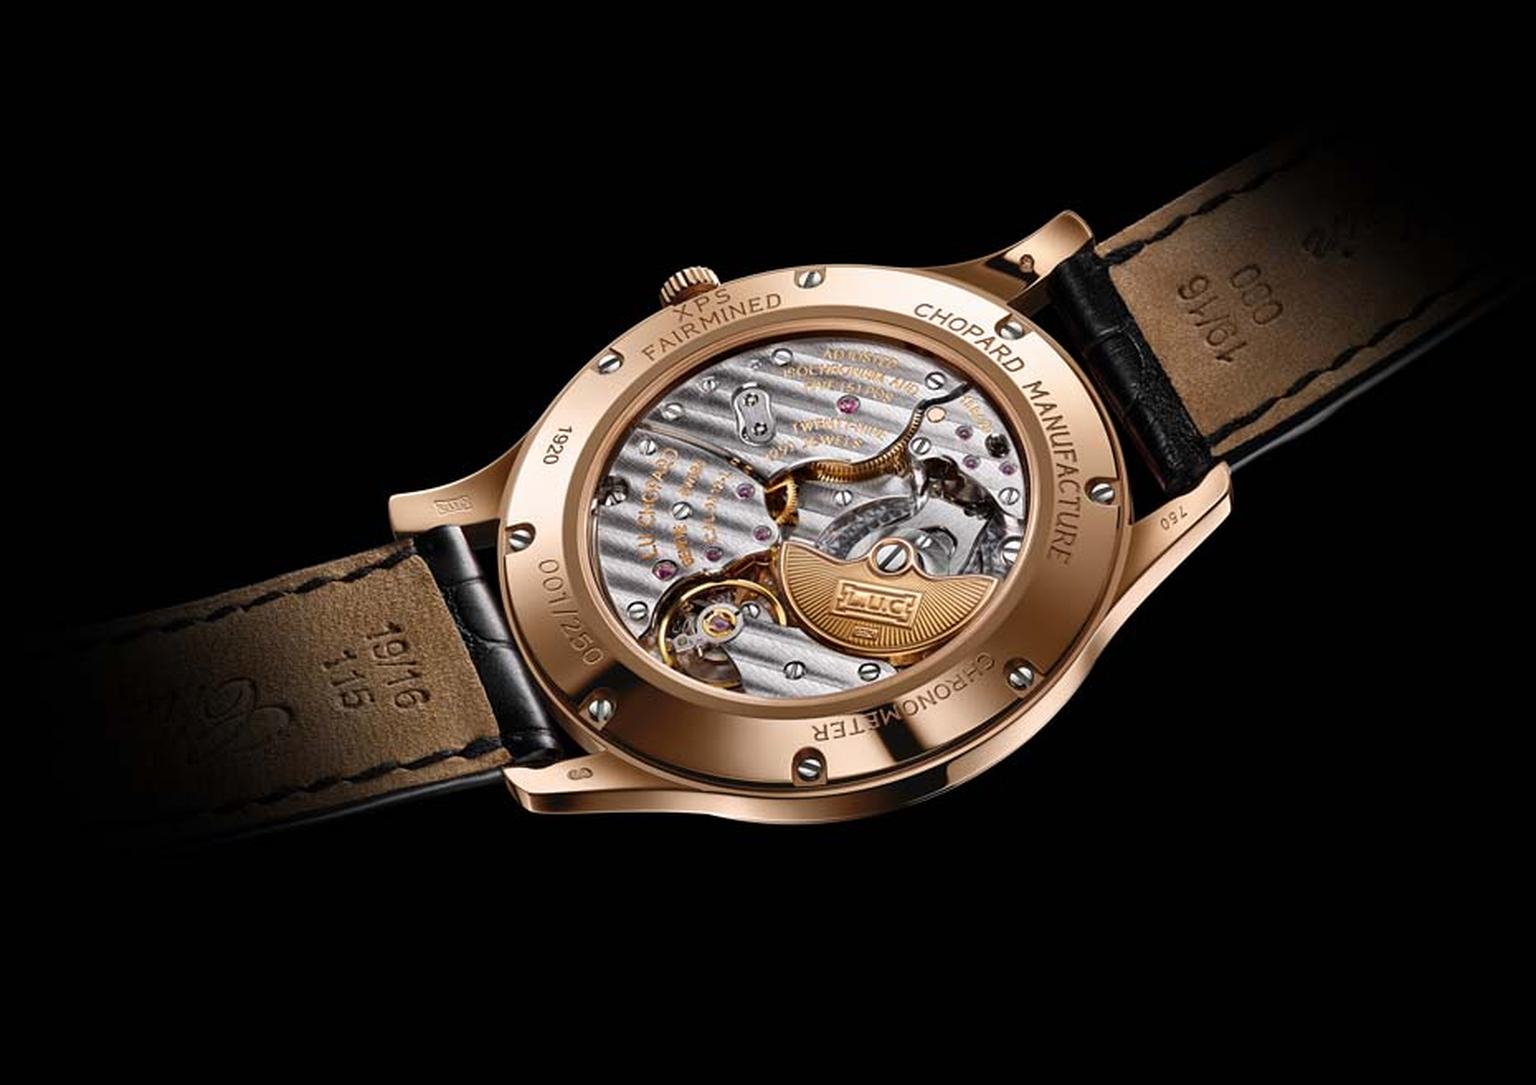 Chopard L.U.C XPS Fairmined watch is equipped with an in-house automatic movement visible through the exhibition caseback, which bears the Fairmined gold hallmark.